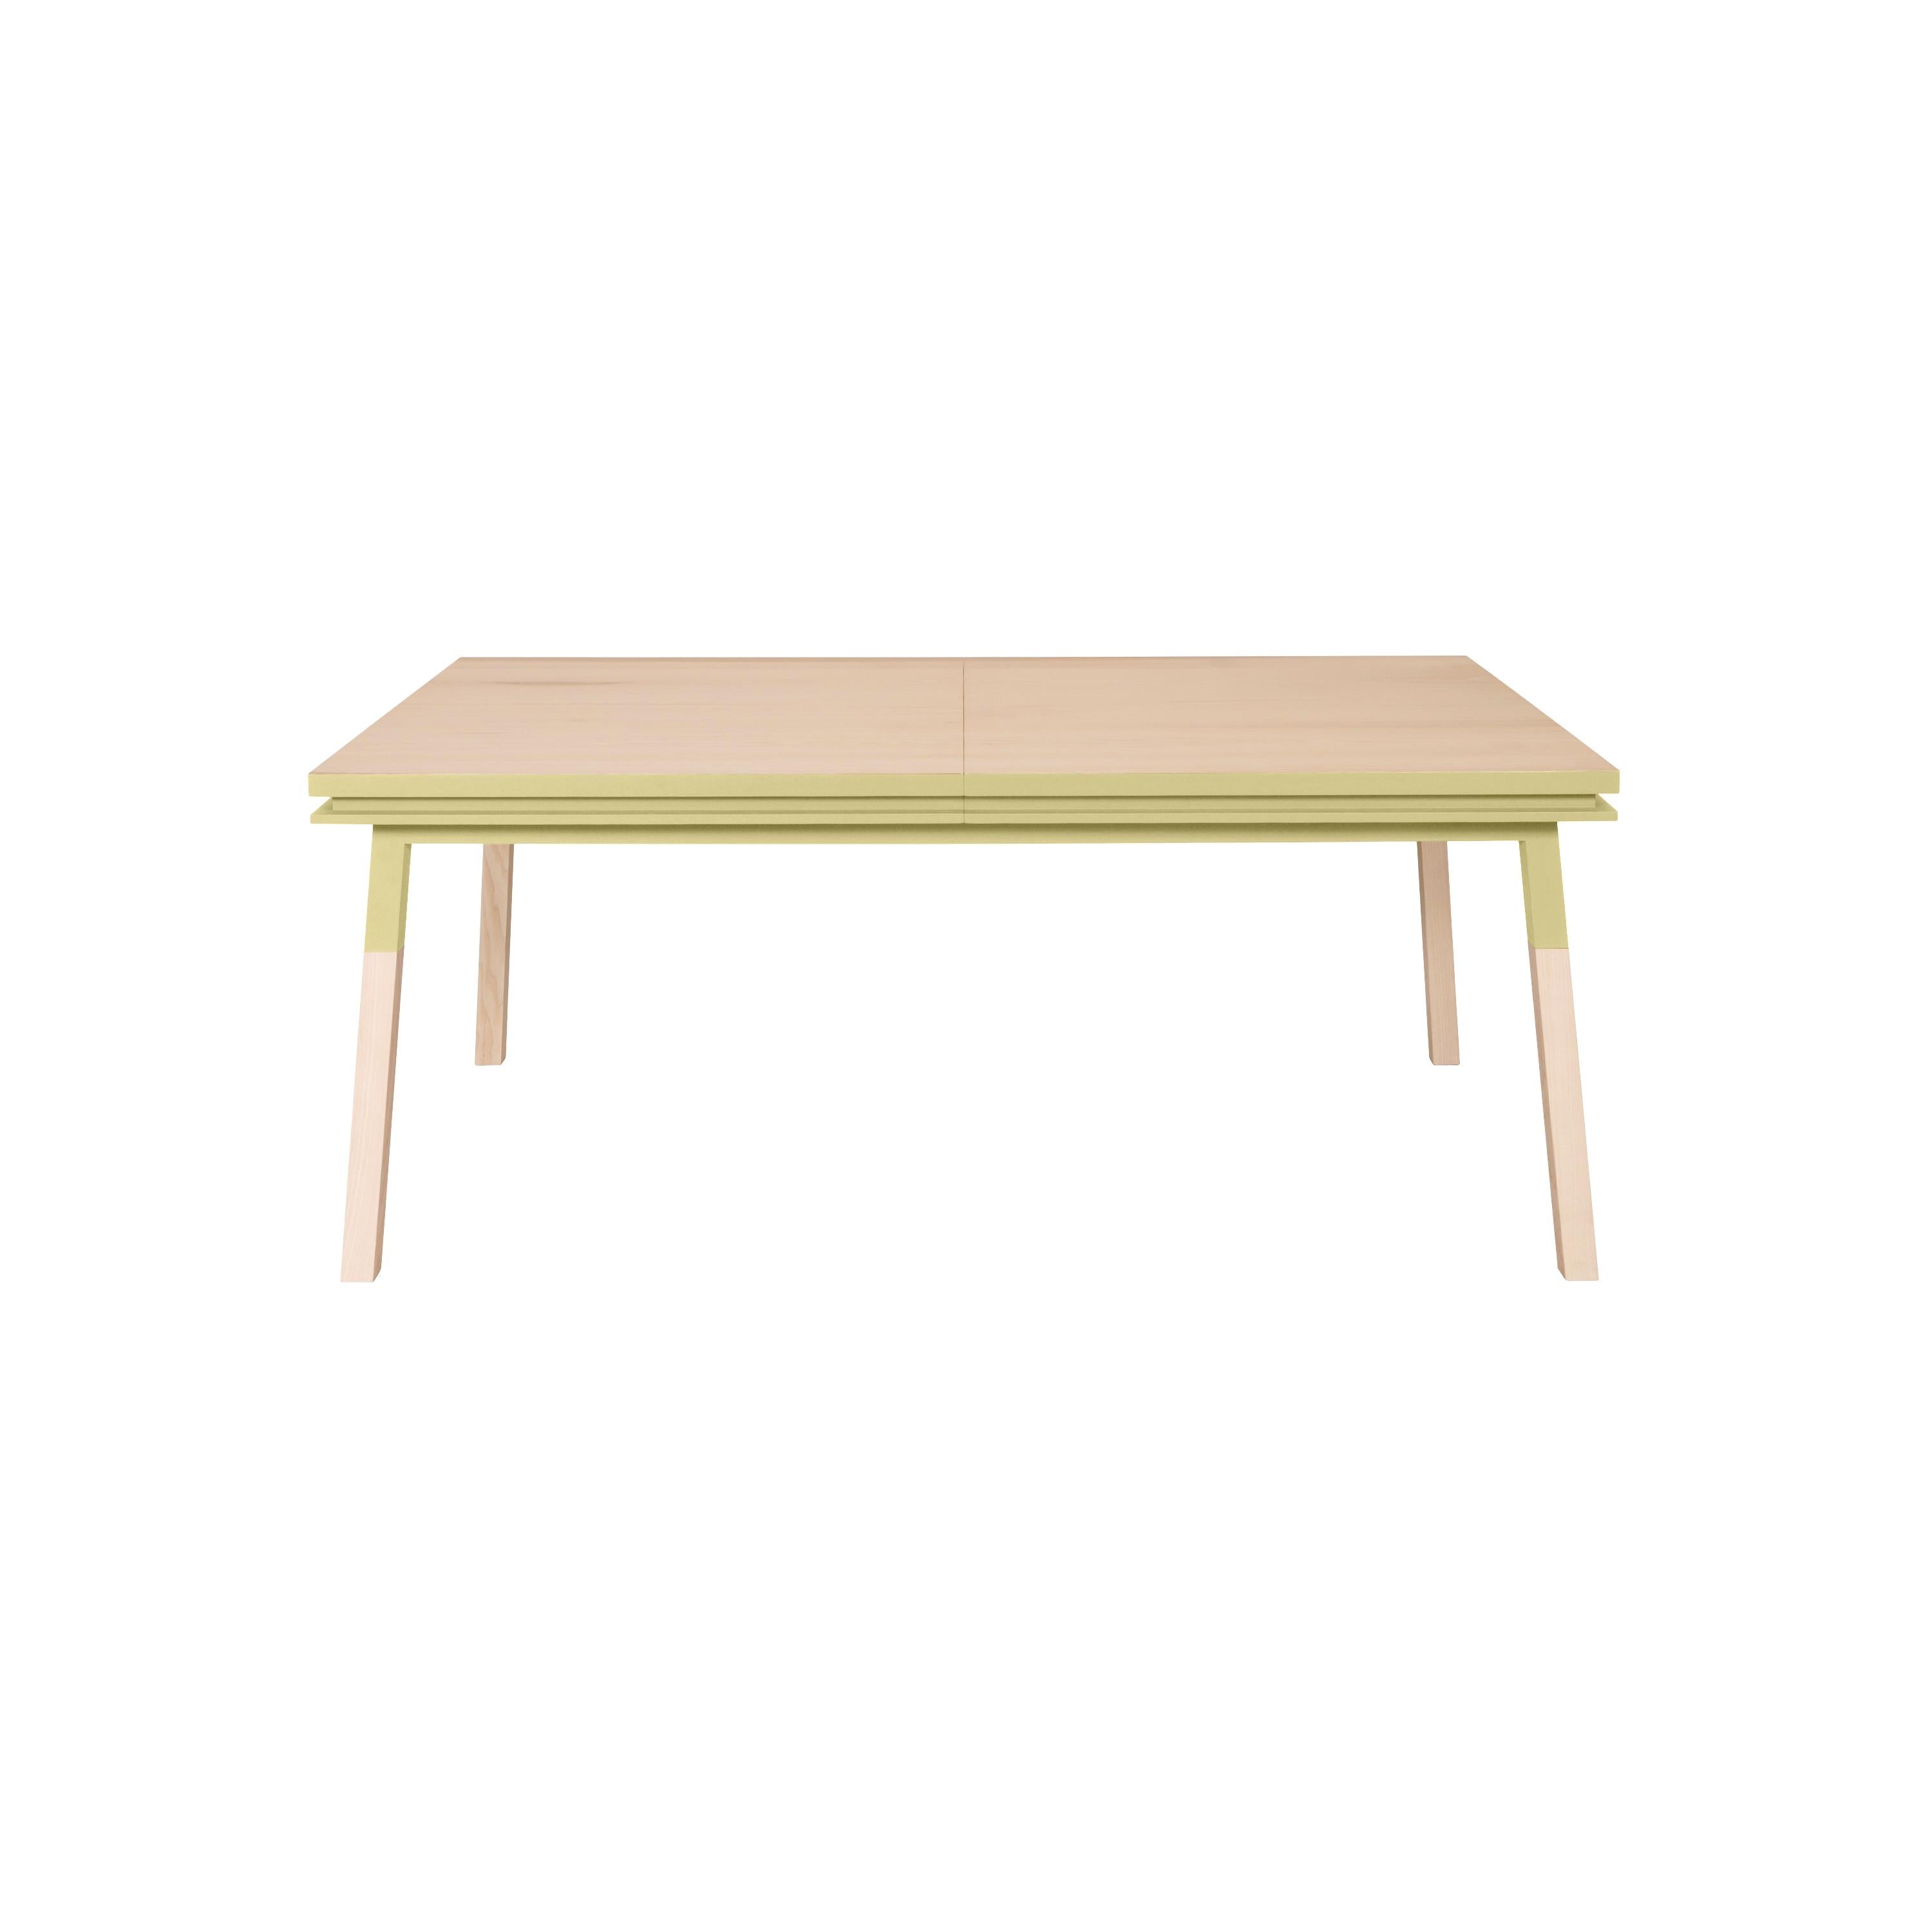 Contemporary Yellow short pants finish for this extensible dining table in solid wood For Sale